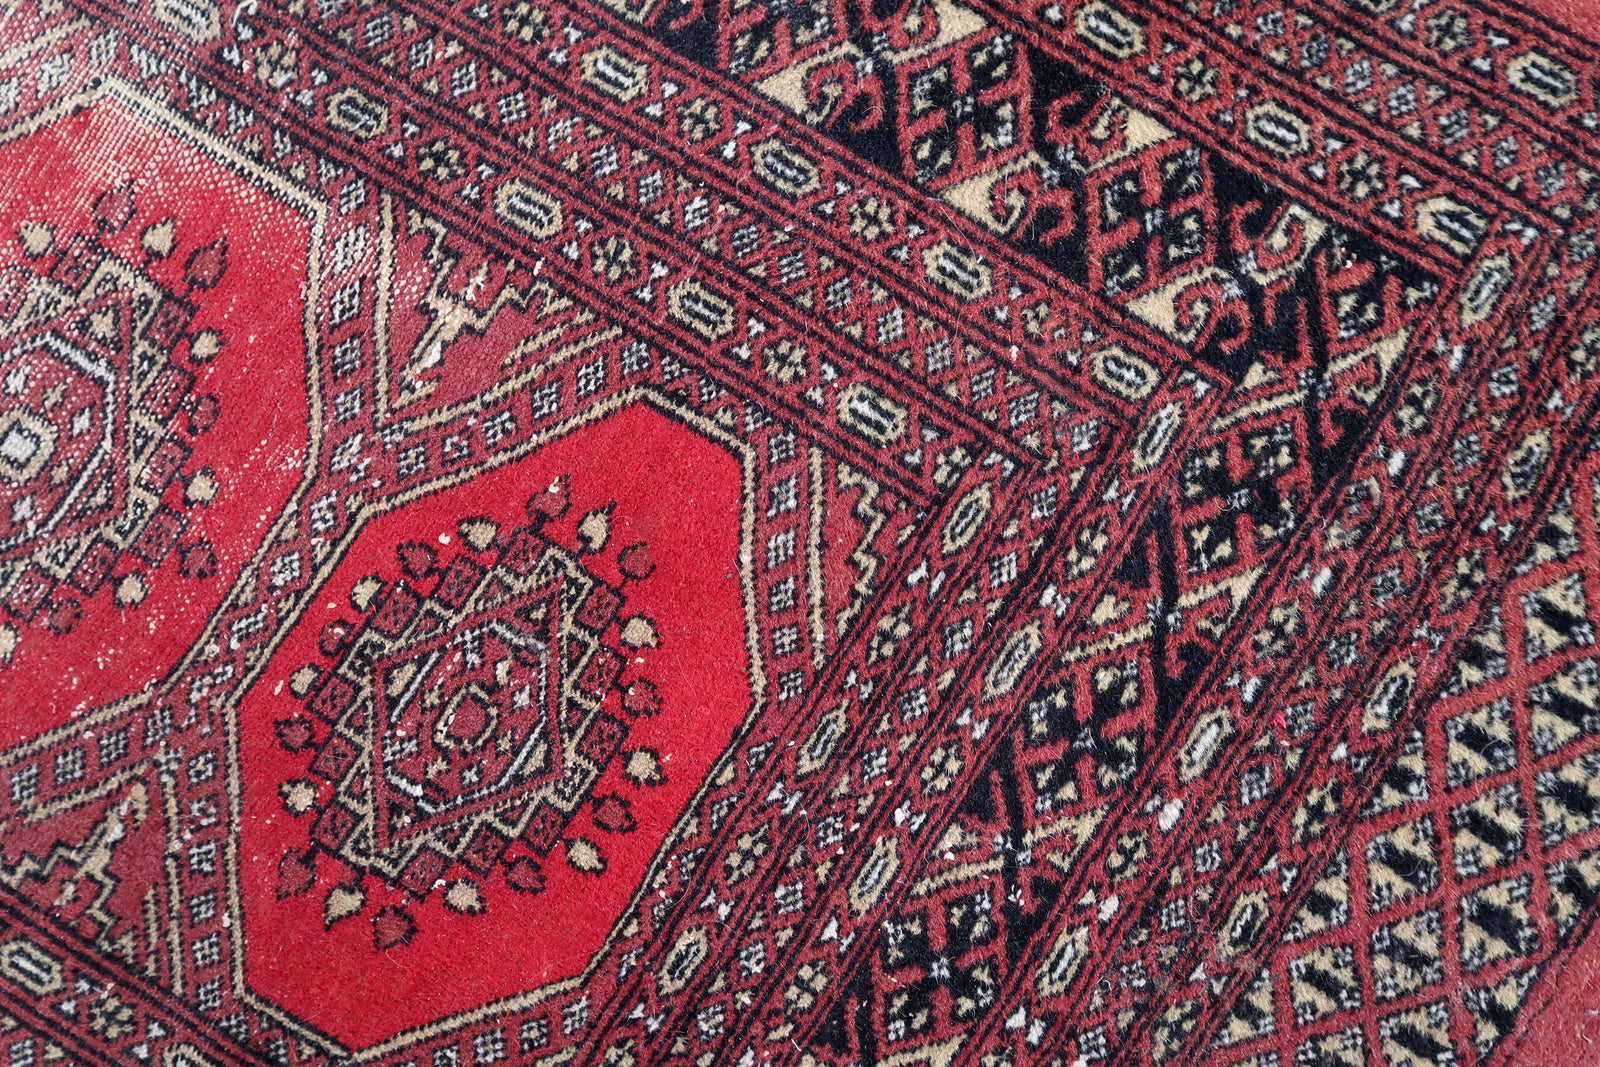 Handmade vintage Uzbek Bukhara rug in classic design. The rug is from the end of 20th century in distressed condition.